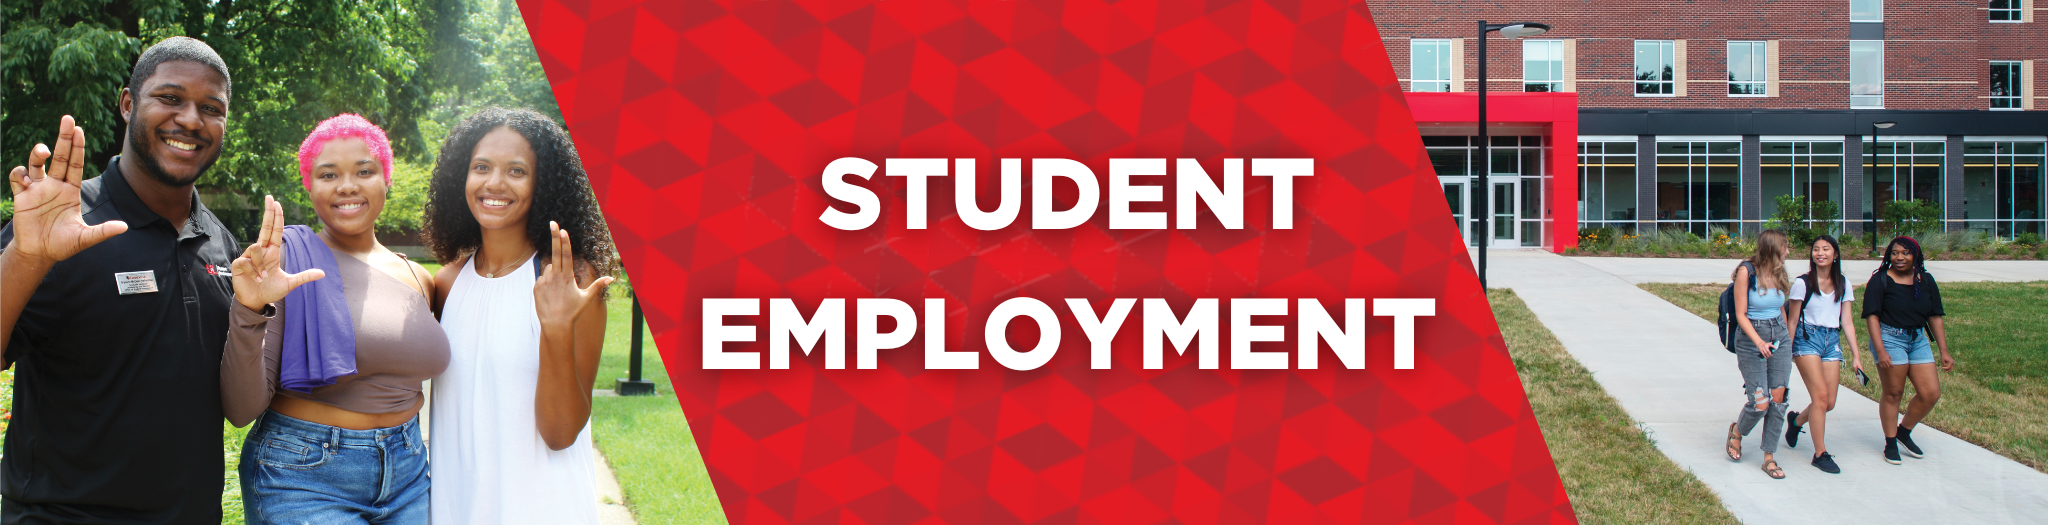 Banner featuring students and the text Student Employment